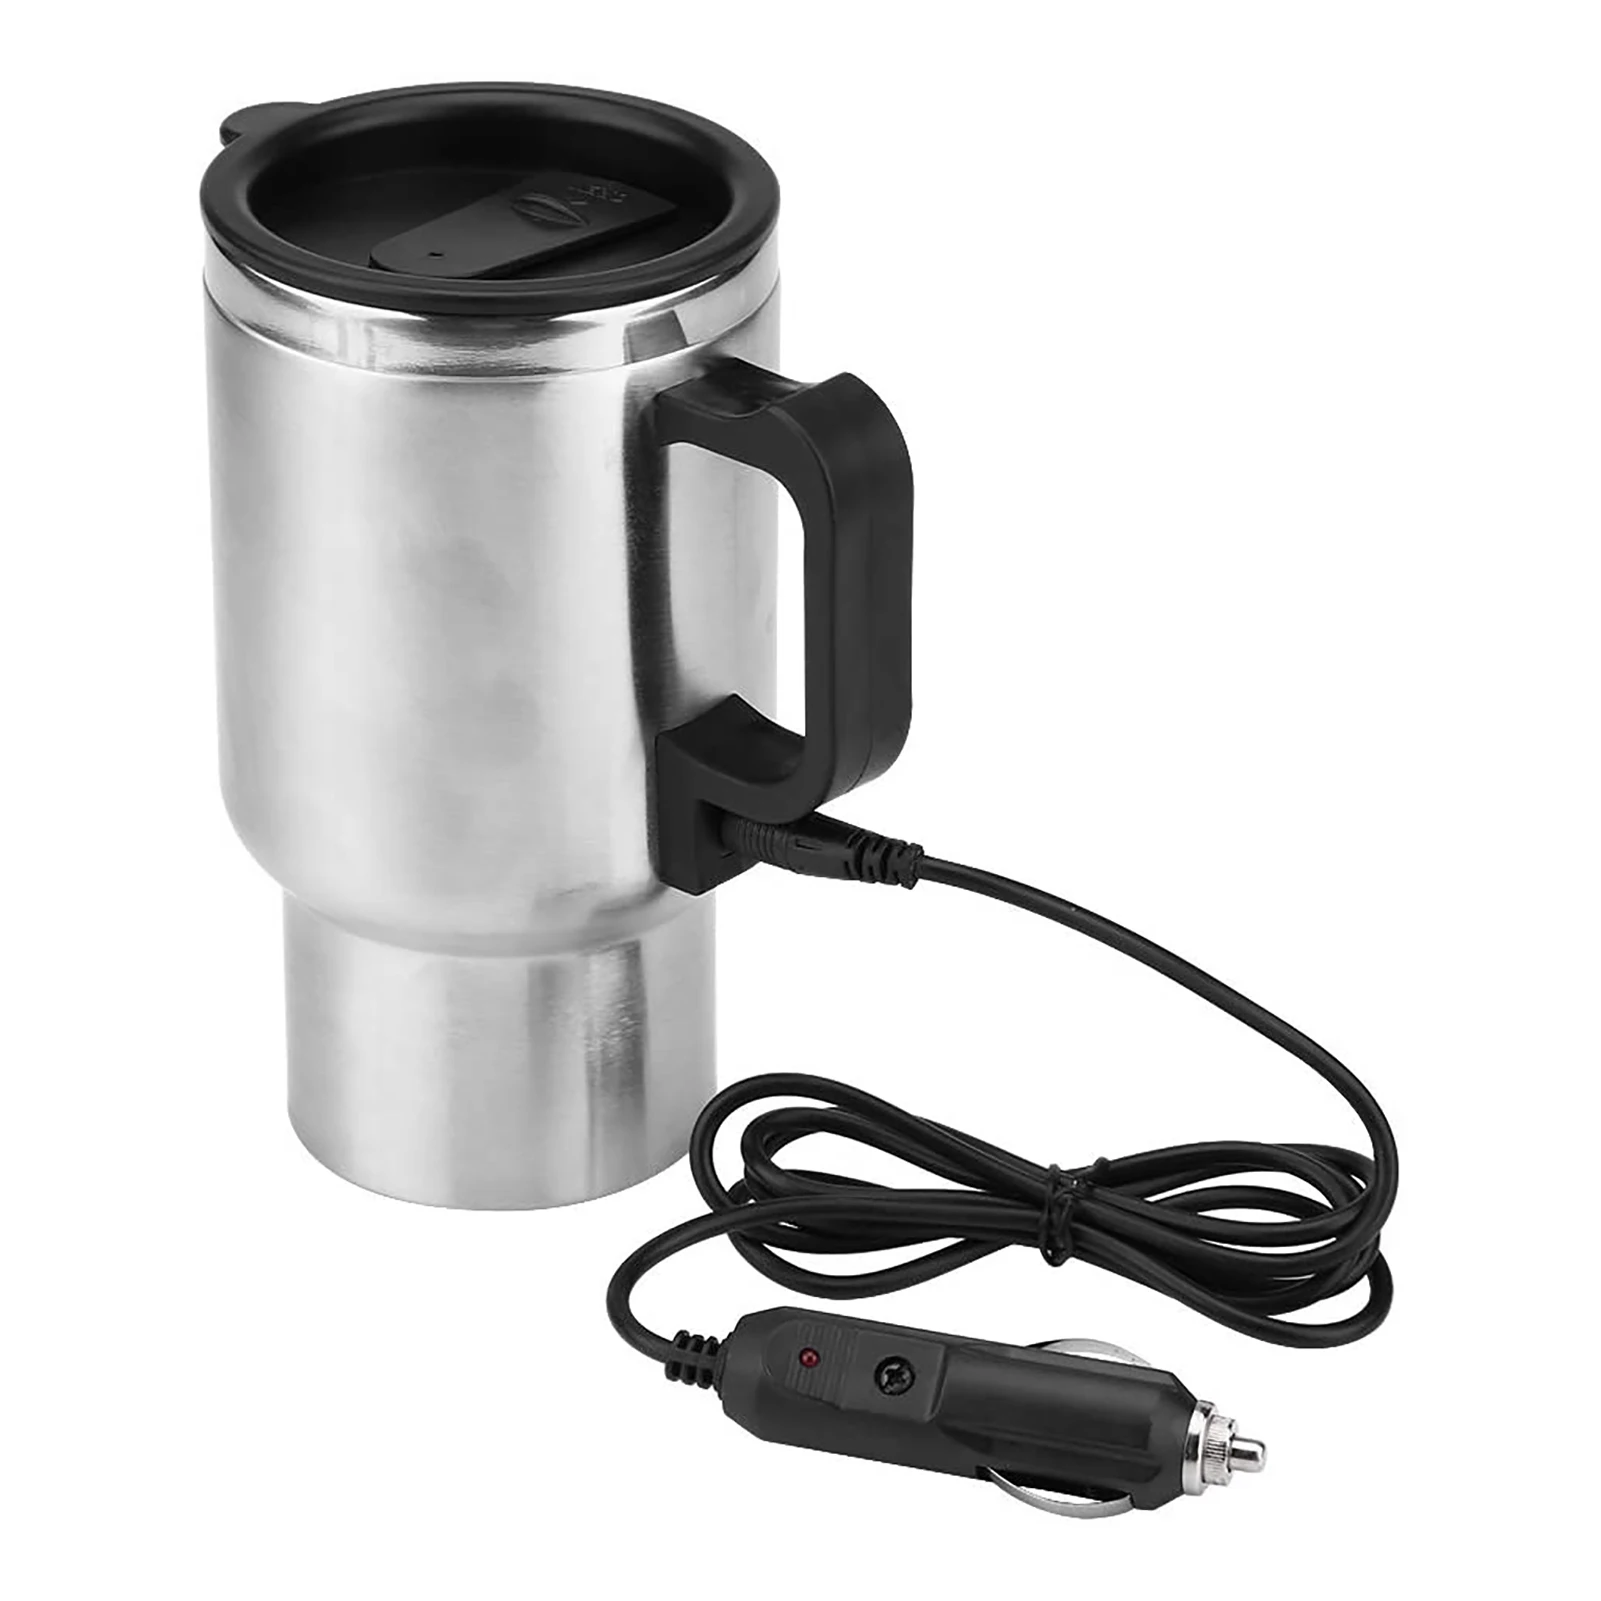 

ML Auto Car Heating Cup Kettle Boiling Stainless Steel Electric Thermos Water Heater With Cigarette Lighter Car Kettle Classical